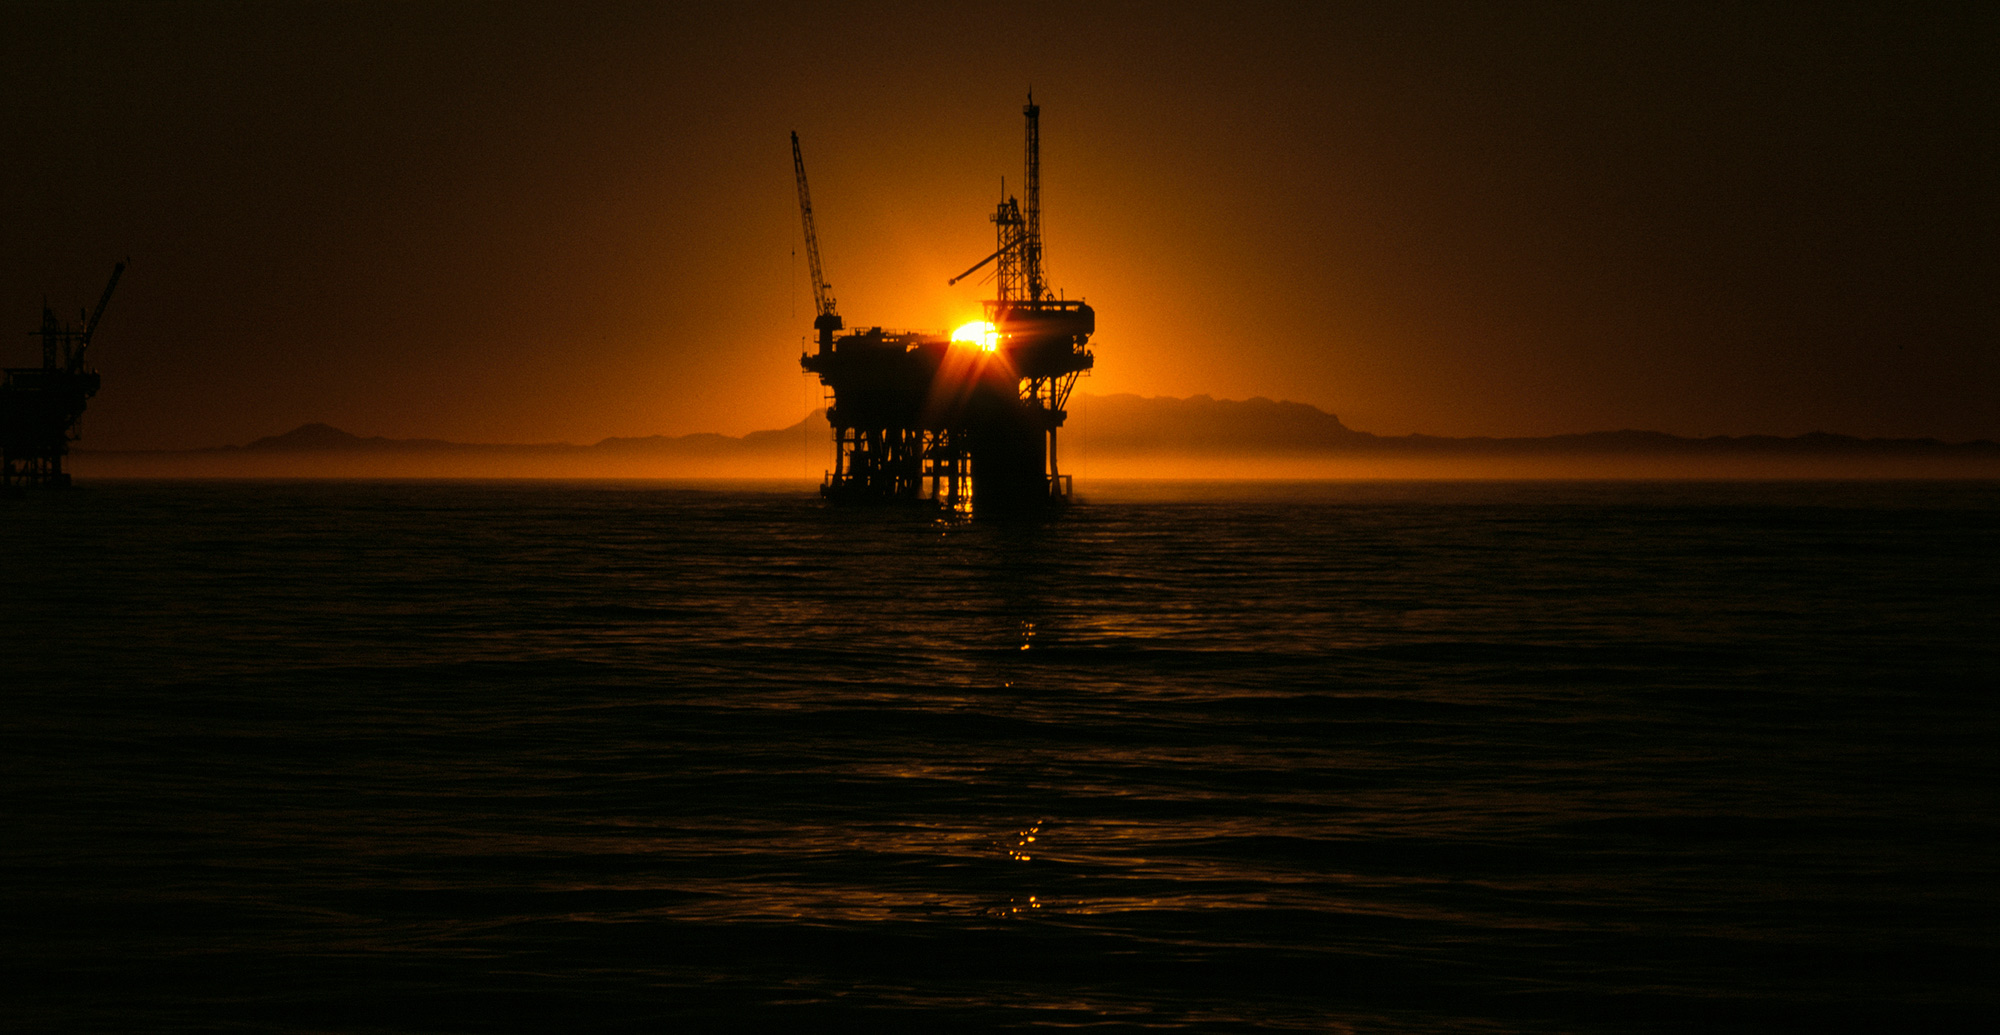 Westwood Insight Special: Offshore – A Lost Cycle?